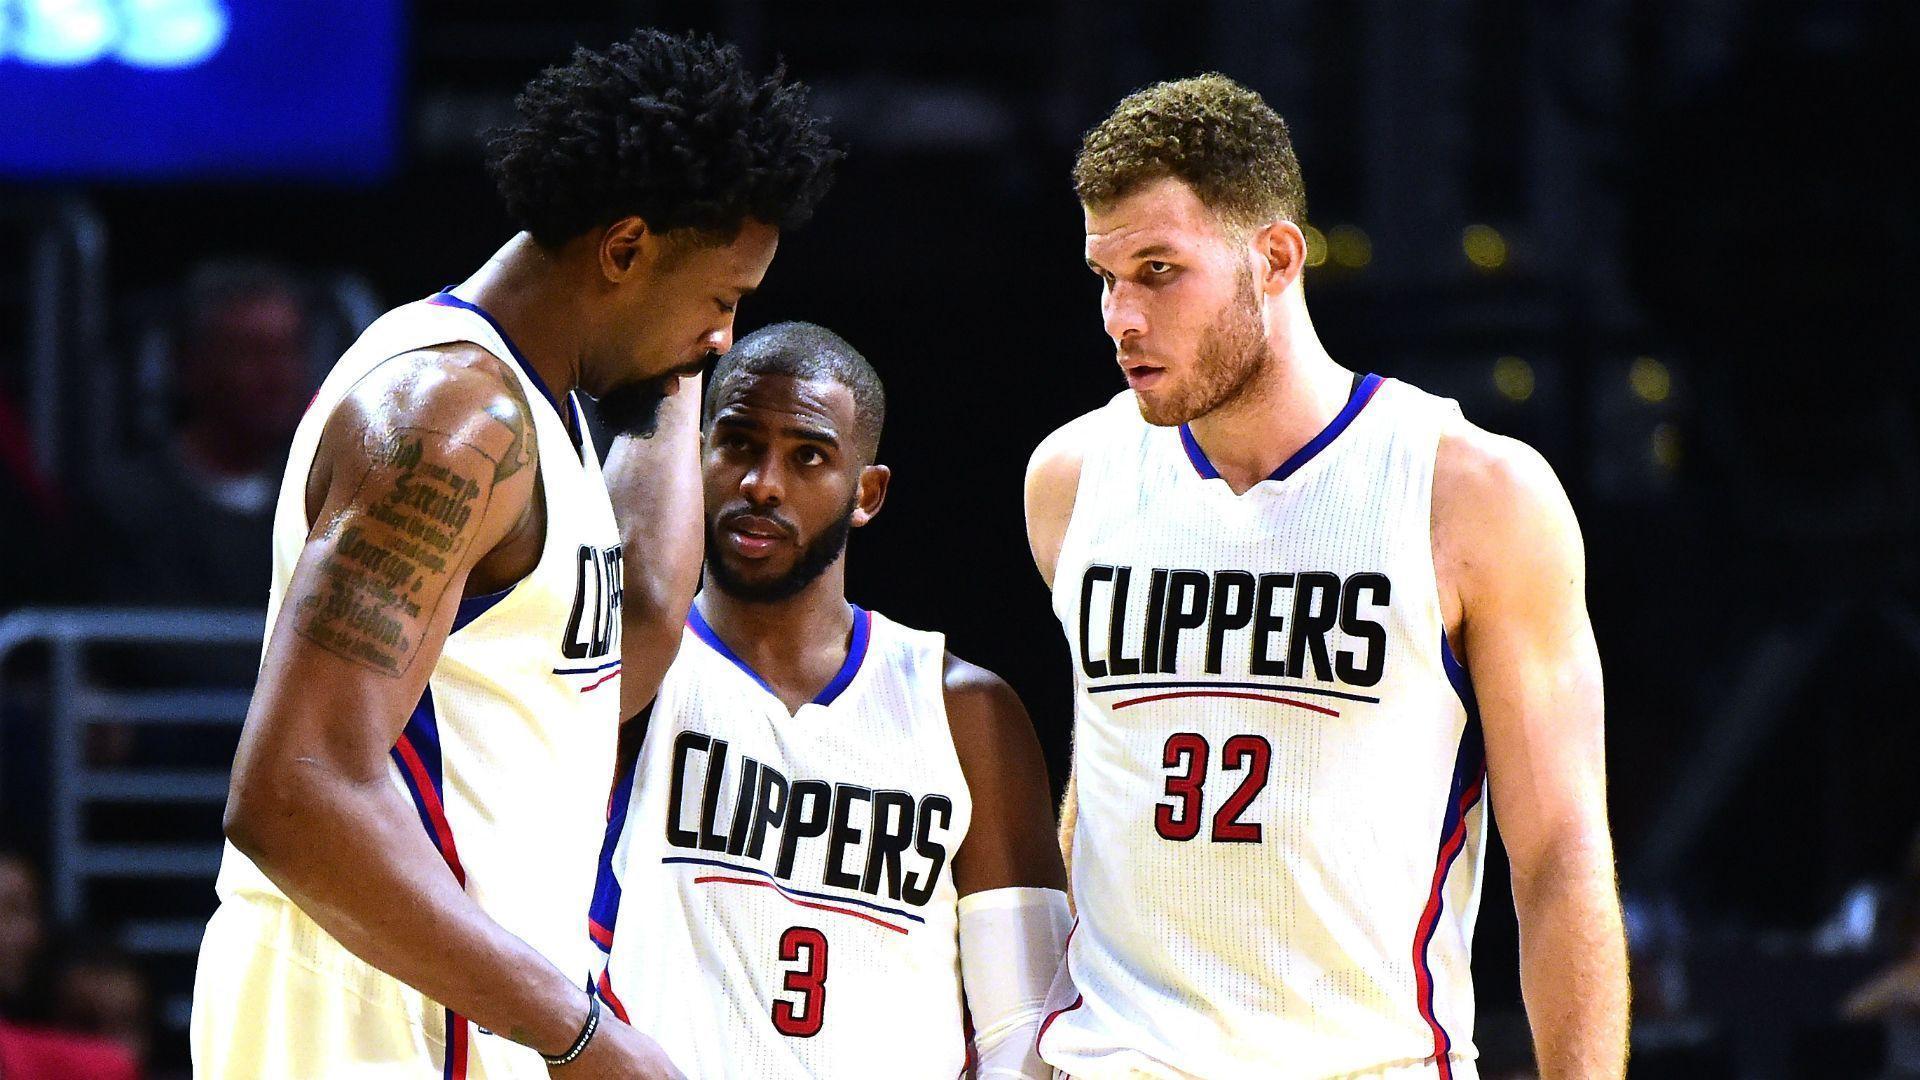 NBA. Chris Paul trade may be the best path for the Clippers